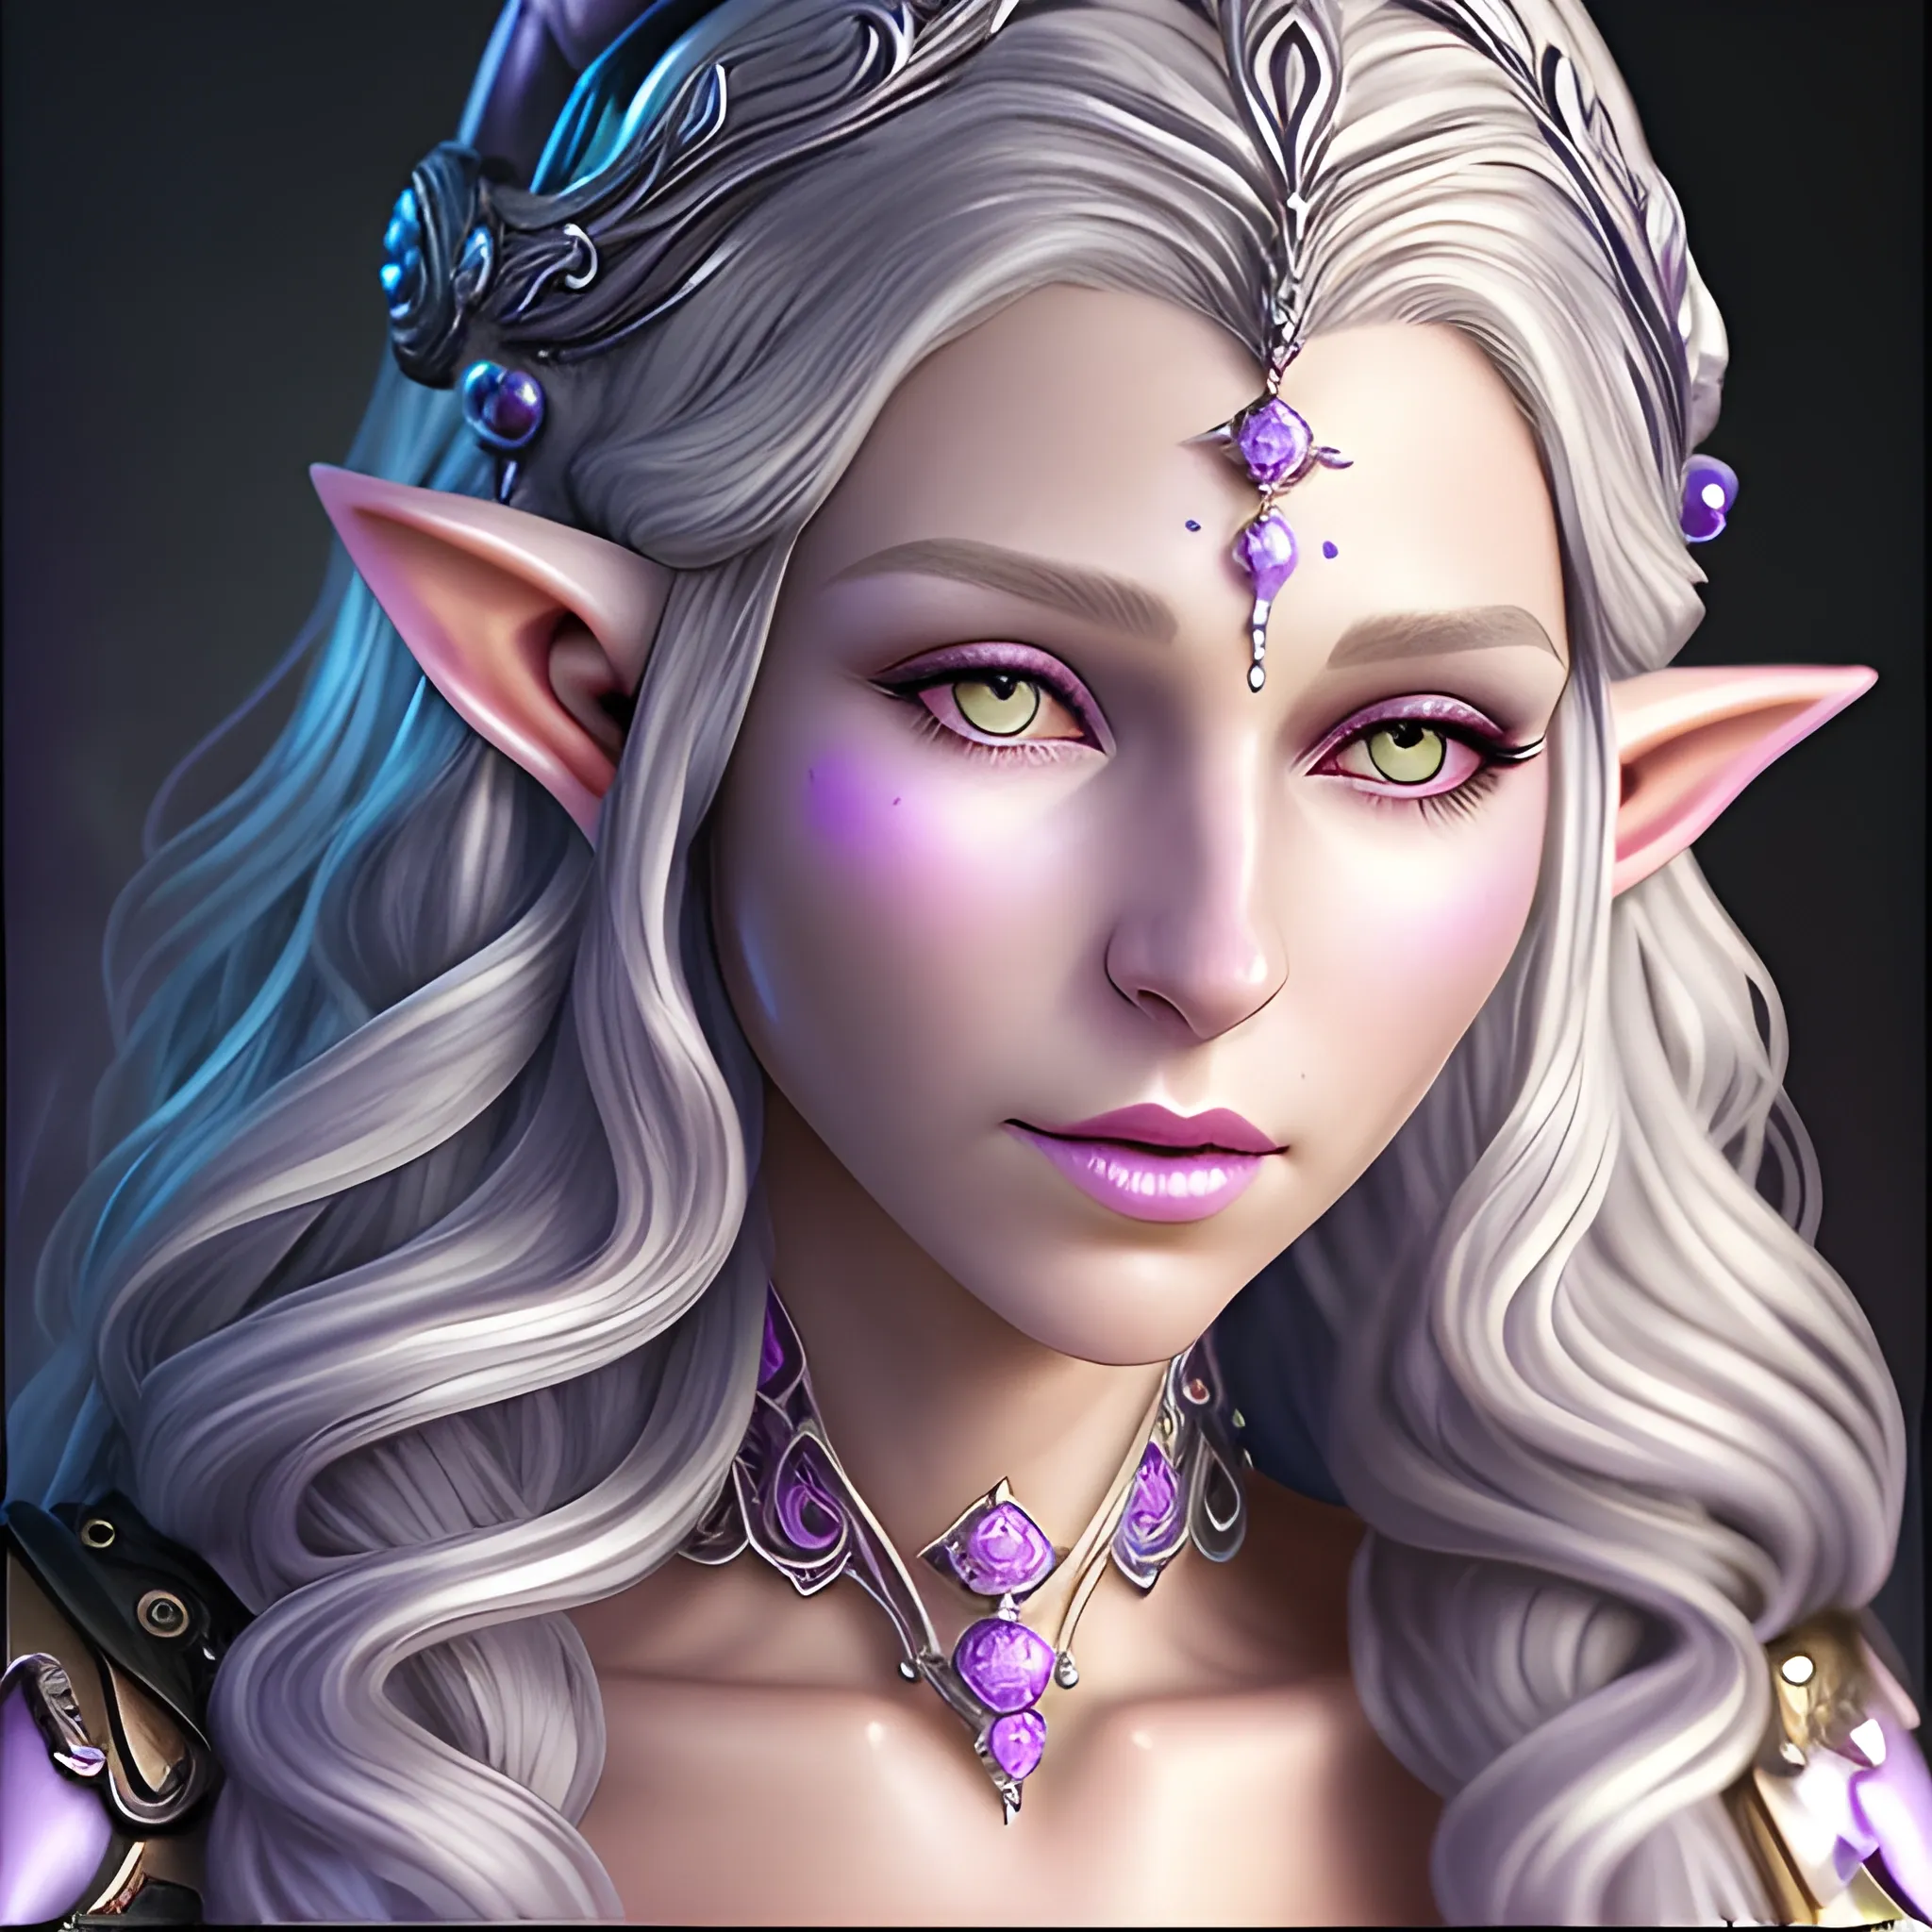 fantasy slightly older female elf with long curling silver hair and purple eyes. Jeweled ears and body. Dewy skin, soft features. Queen bejeweled portrait 
